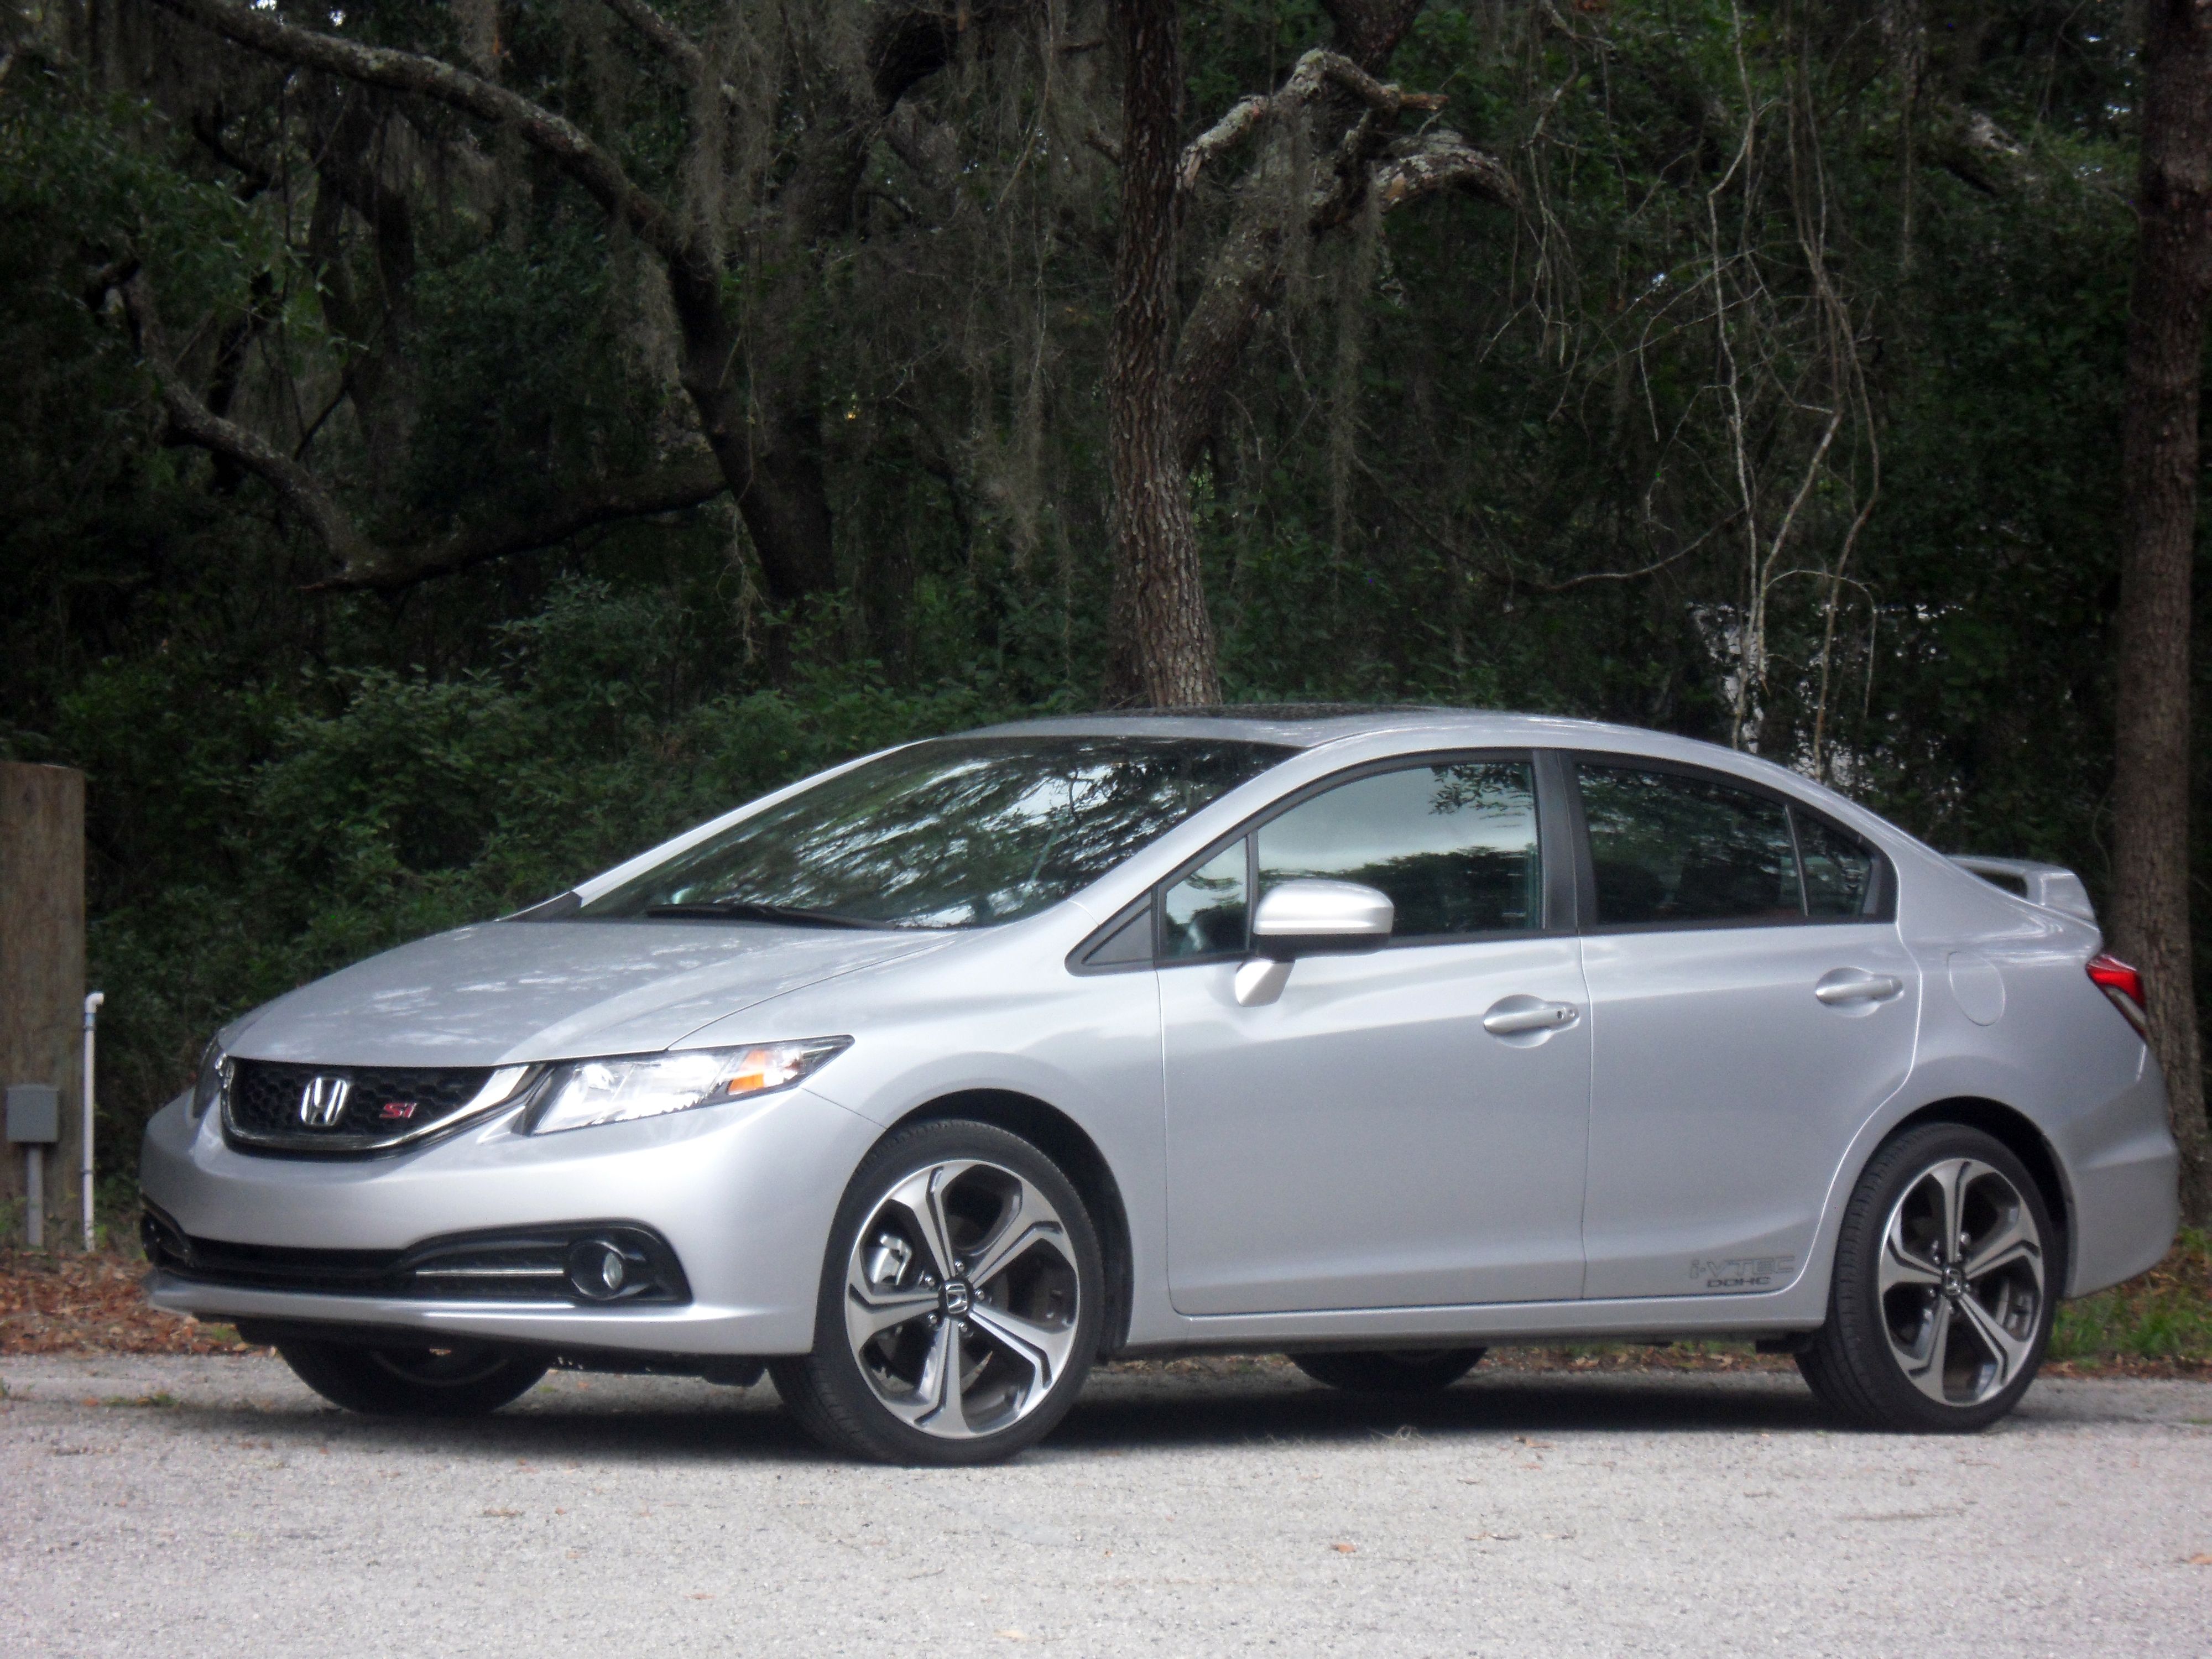 2014 Honda Civic Research, photos, specs, and expertise